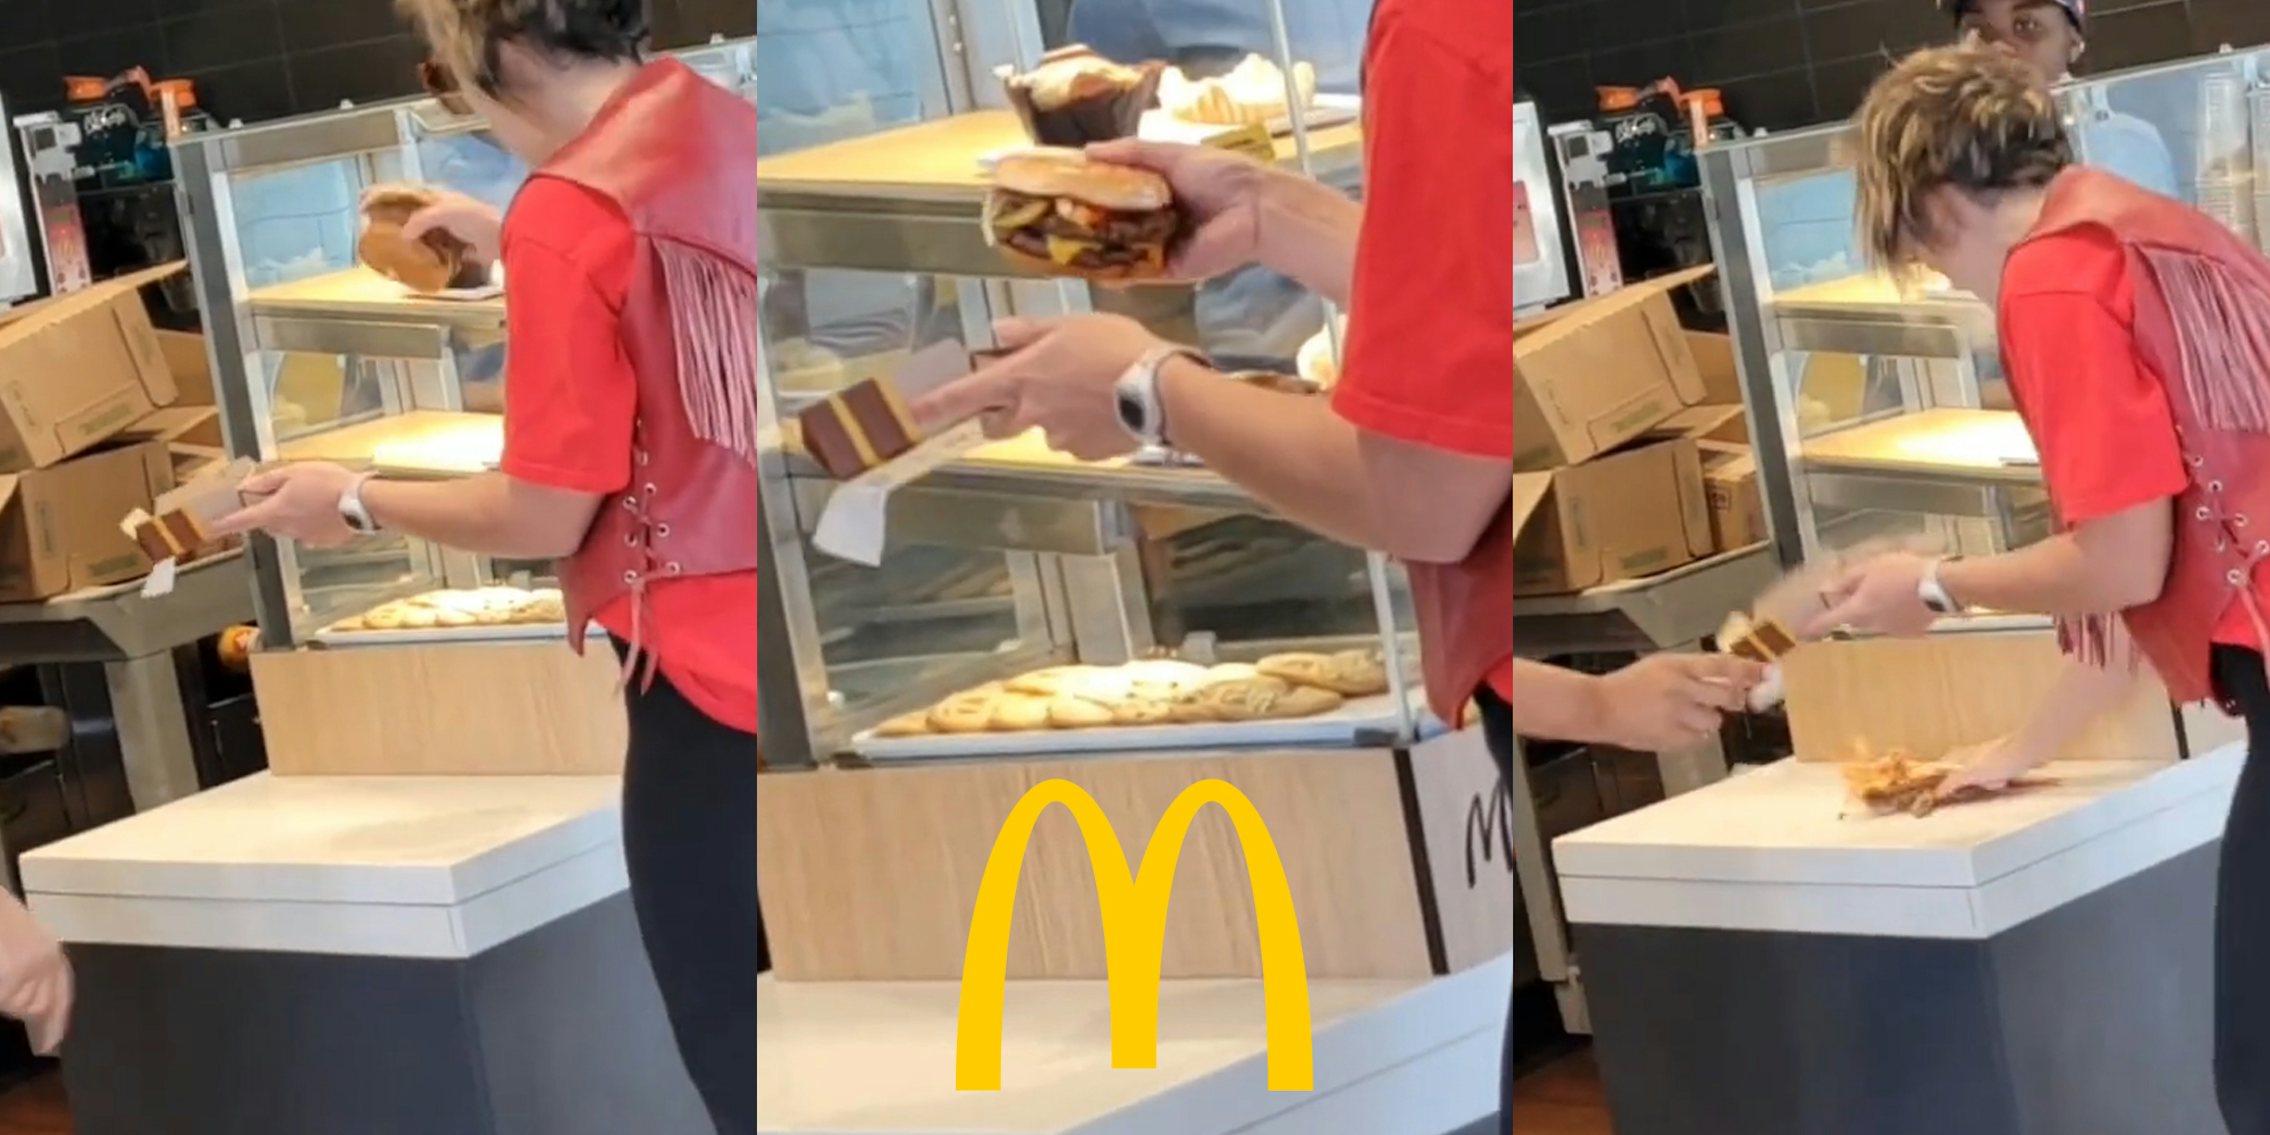 McDonald's customer holding burger up at counter (l) McDonald's customer holding burger with ketchup on it with McDonald's golden arches 'm' logo at bottom (c) McDonald's customer slamming burger onto counter (r)